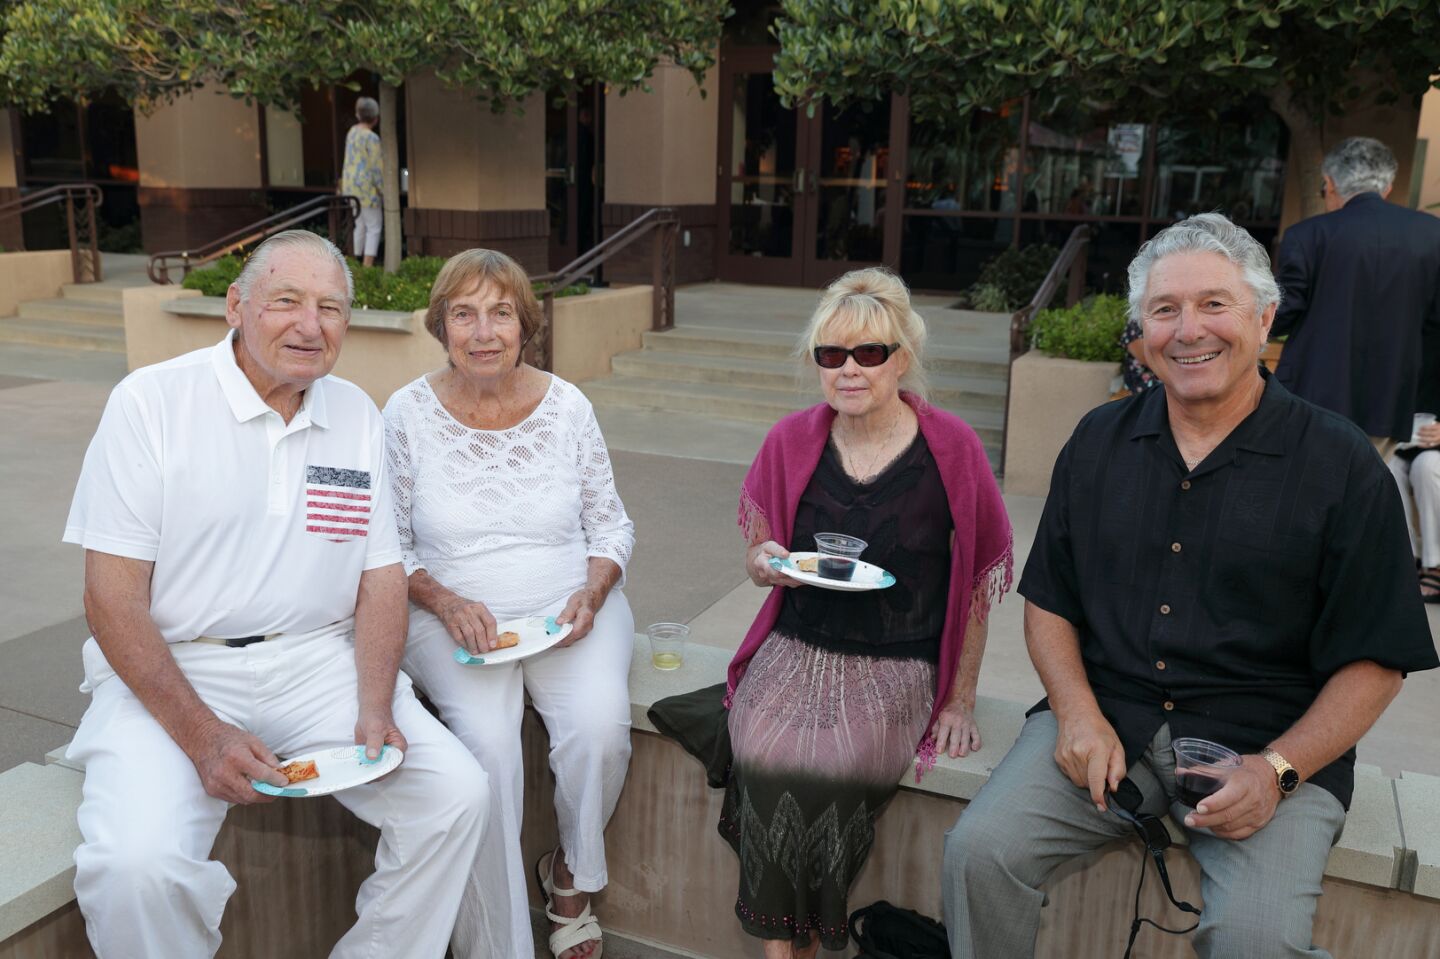 Bill and Marion Hinchy, Jill and Luis Valerio